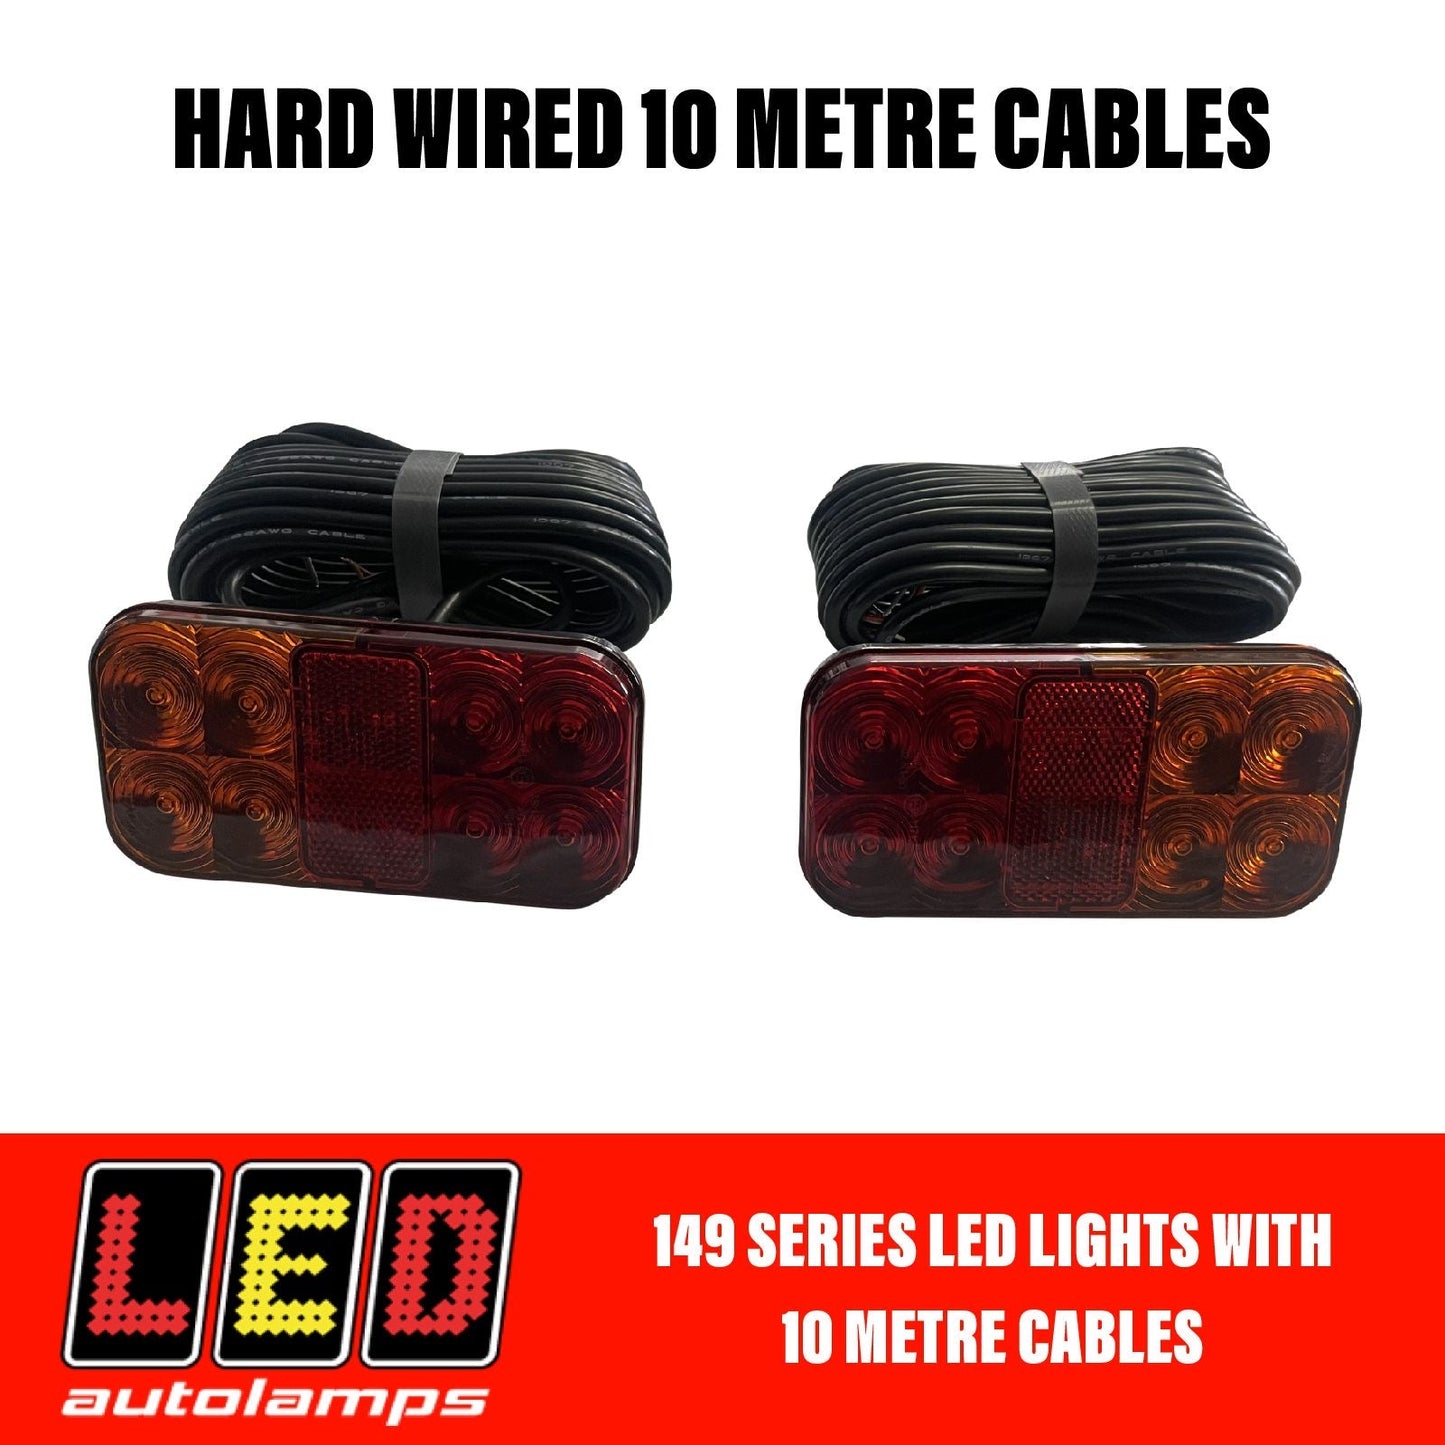 LED AUTOLAMPS 149 SERIES LIGHTS with 10 Metre Cables